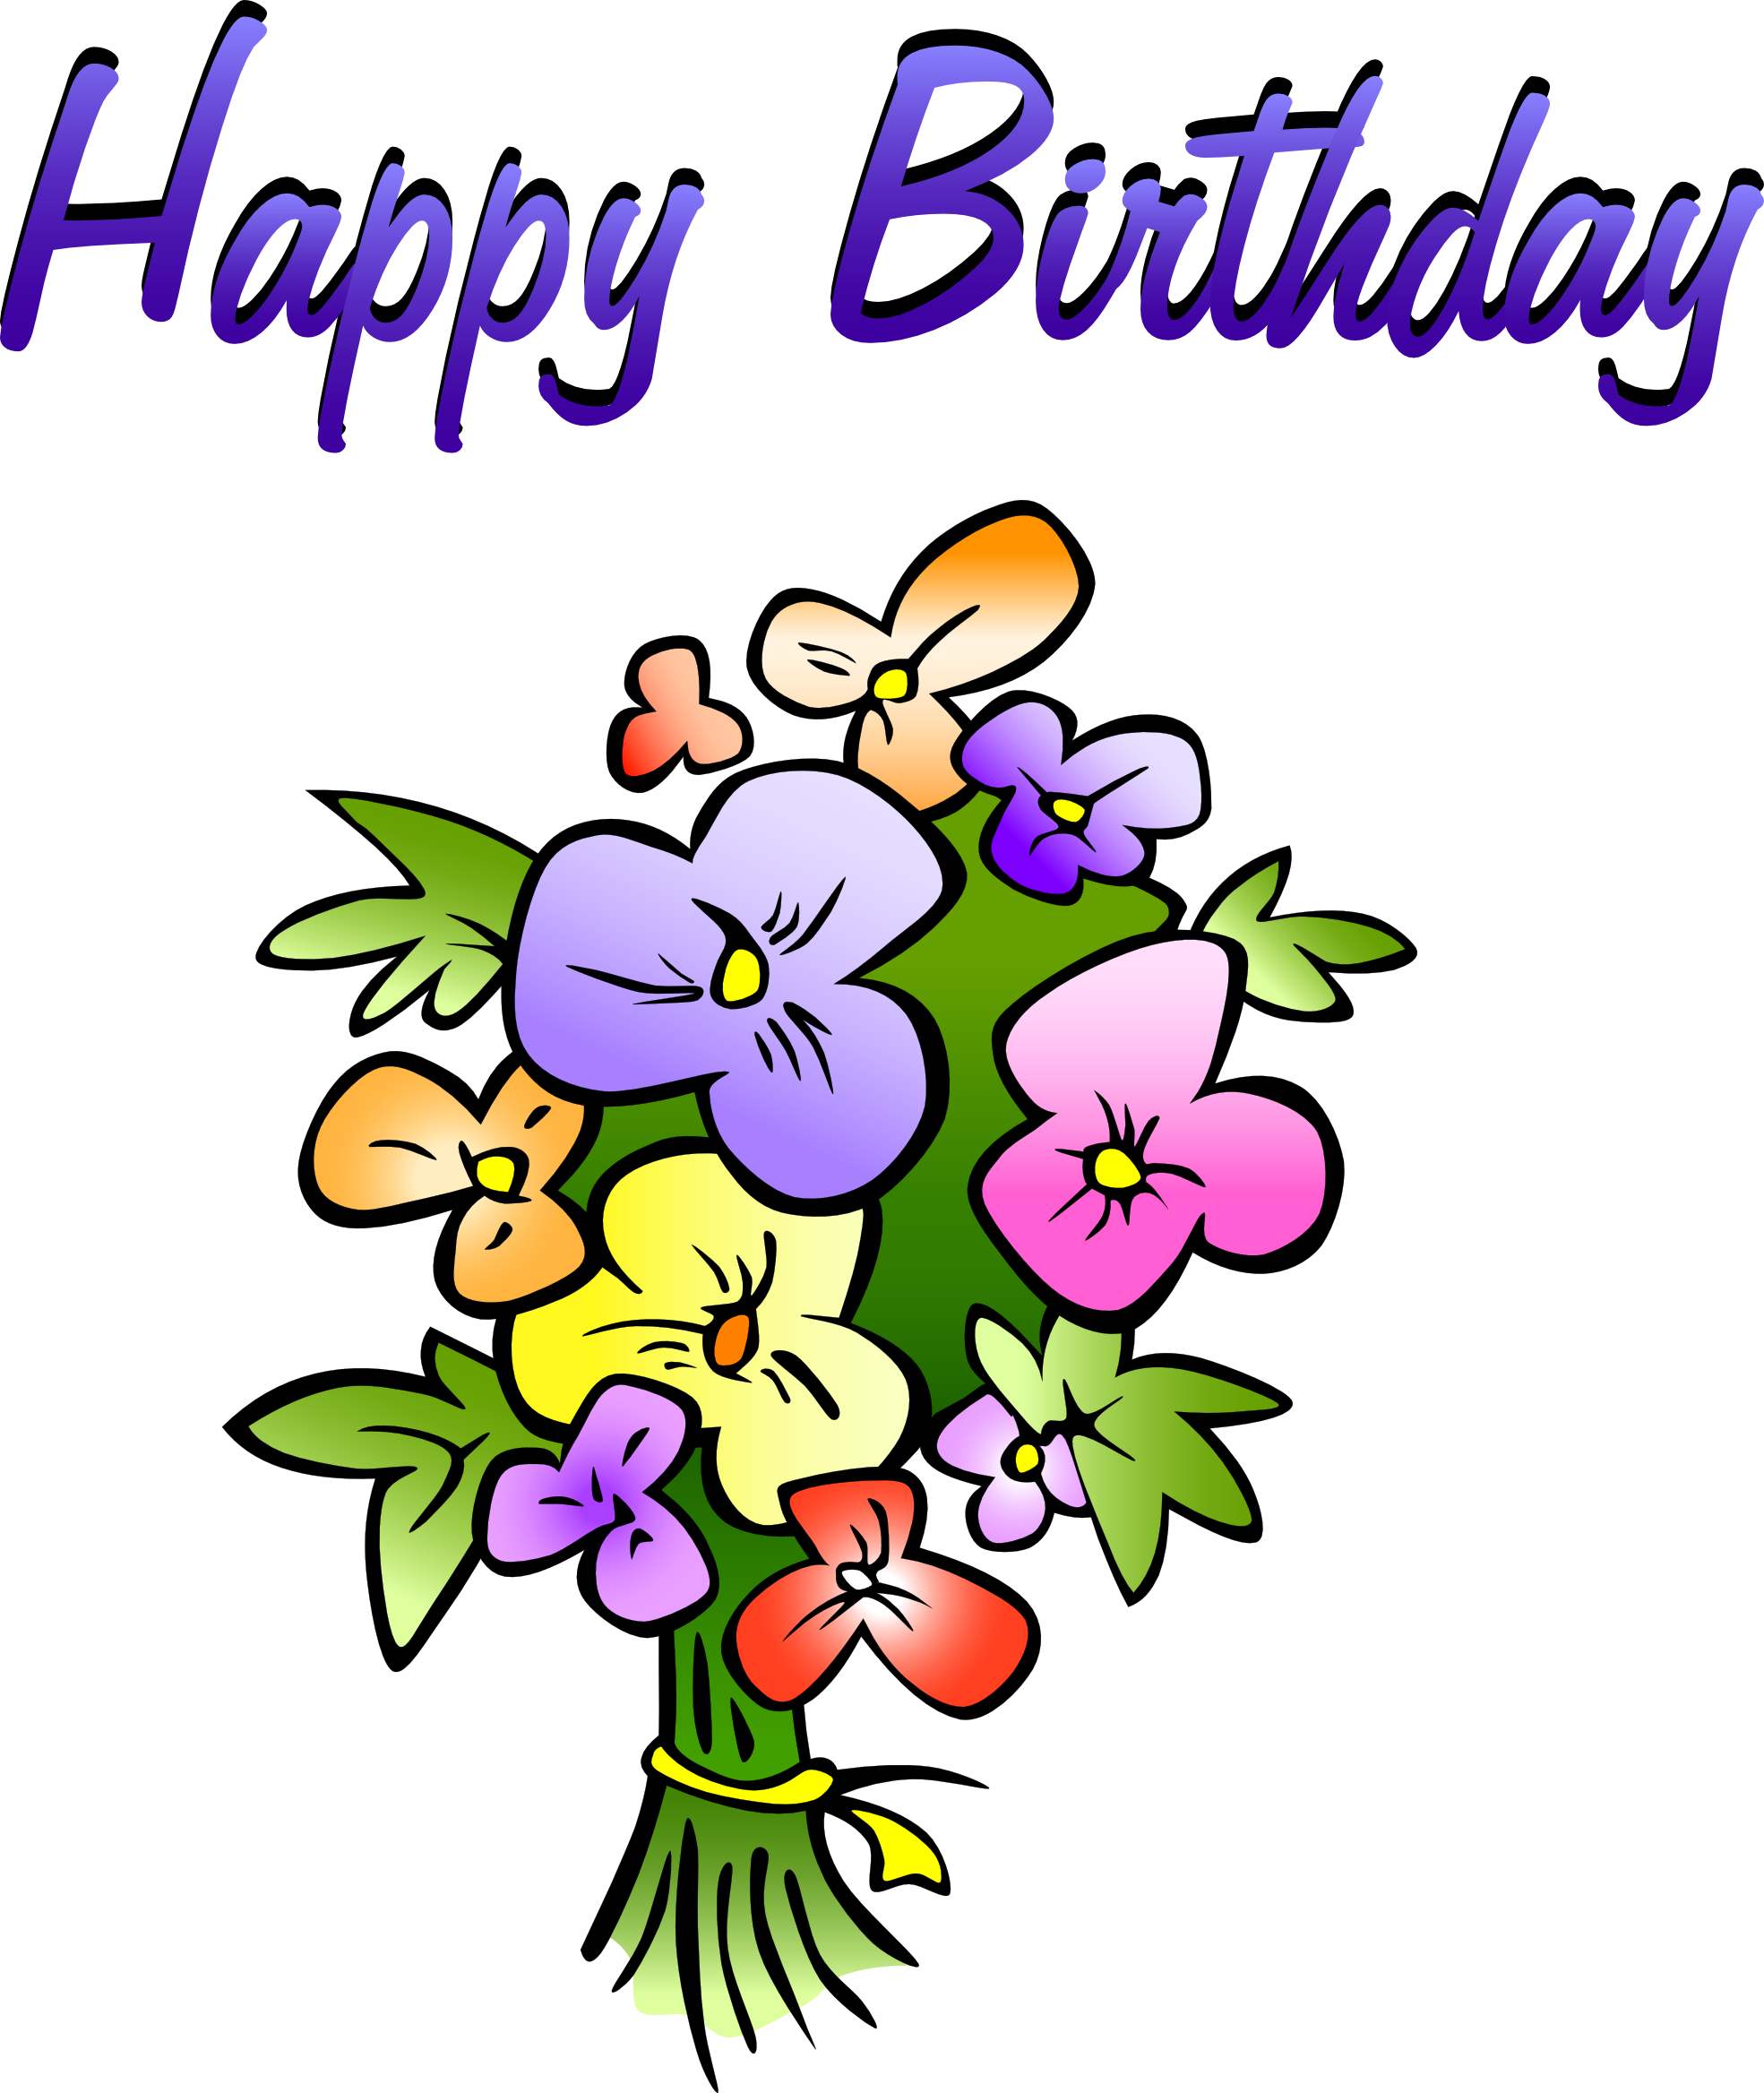 Clip Arts Related To : happy birthday lettering design. 